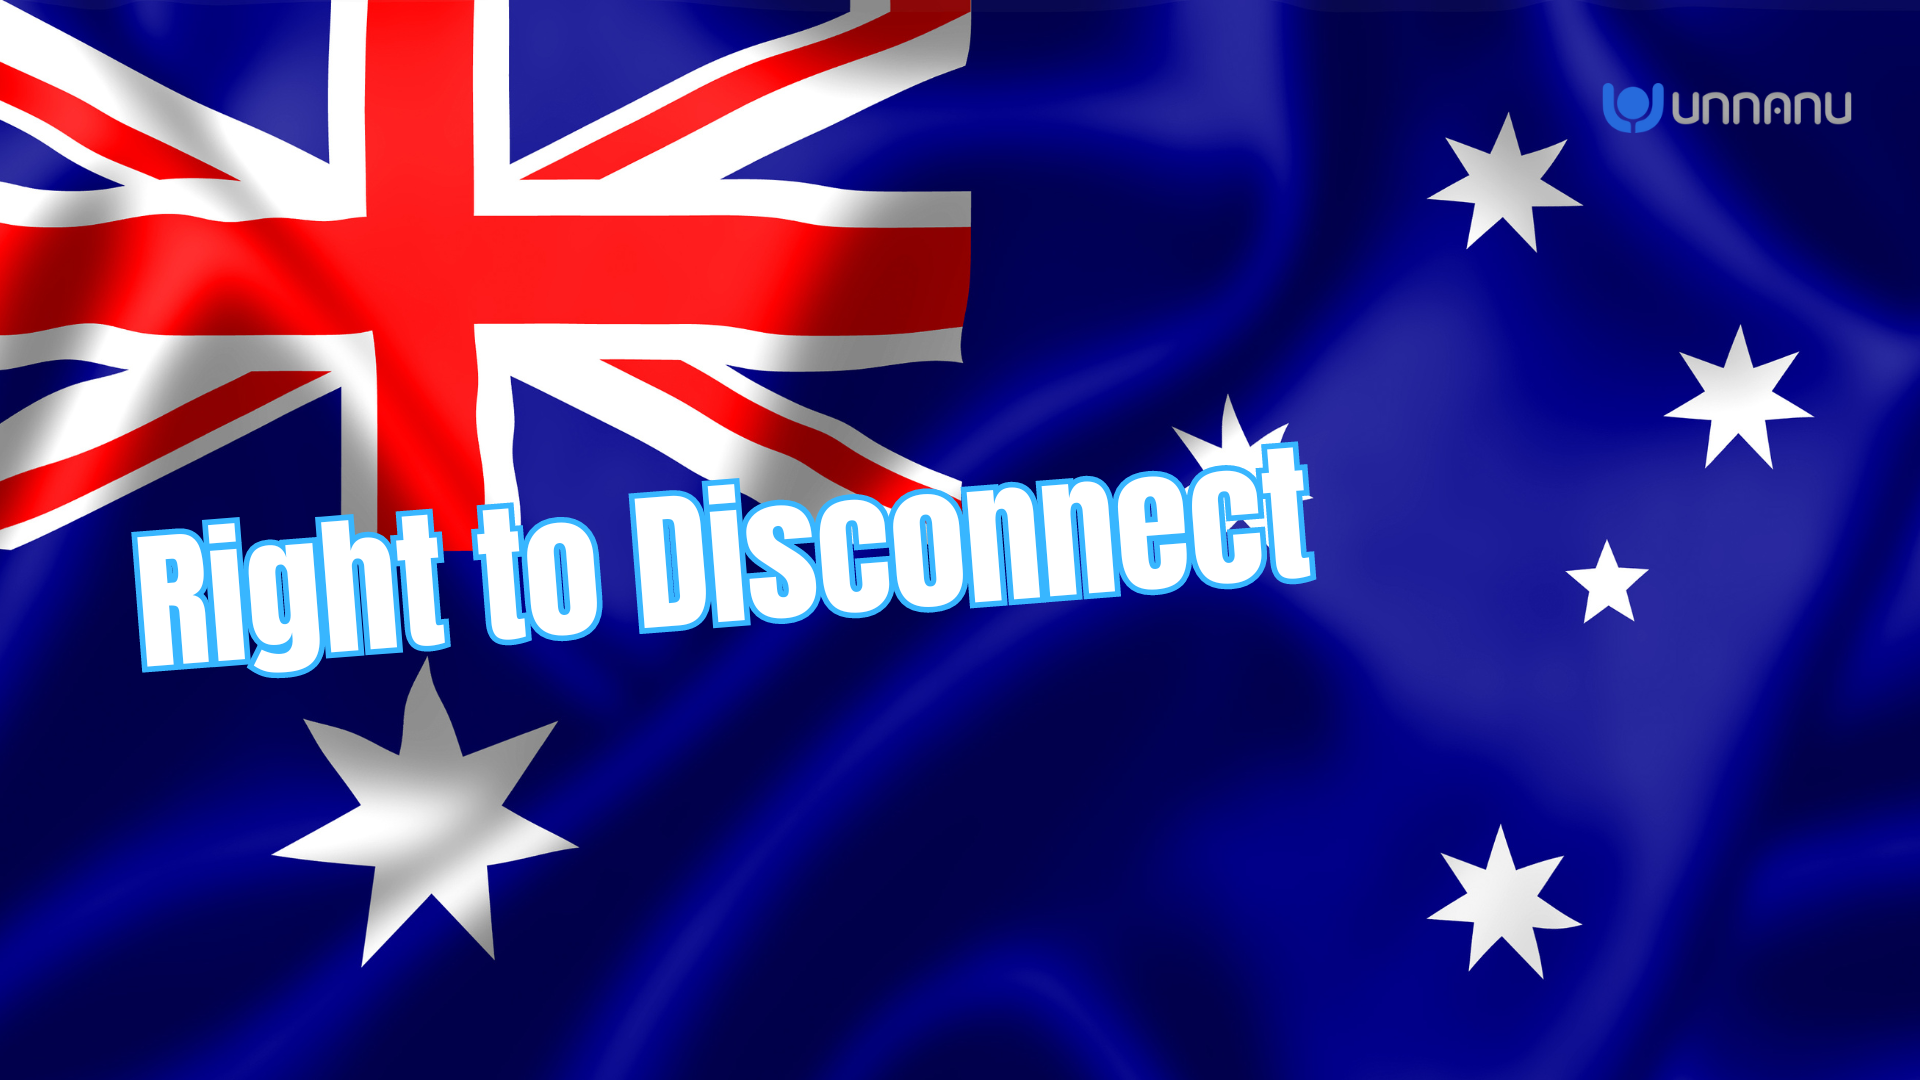 Australia’s Workers’ ‘Right To Disconnect’ | Has Global Implications